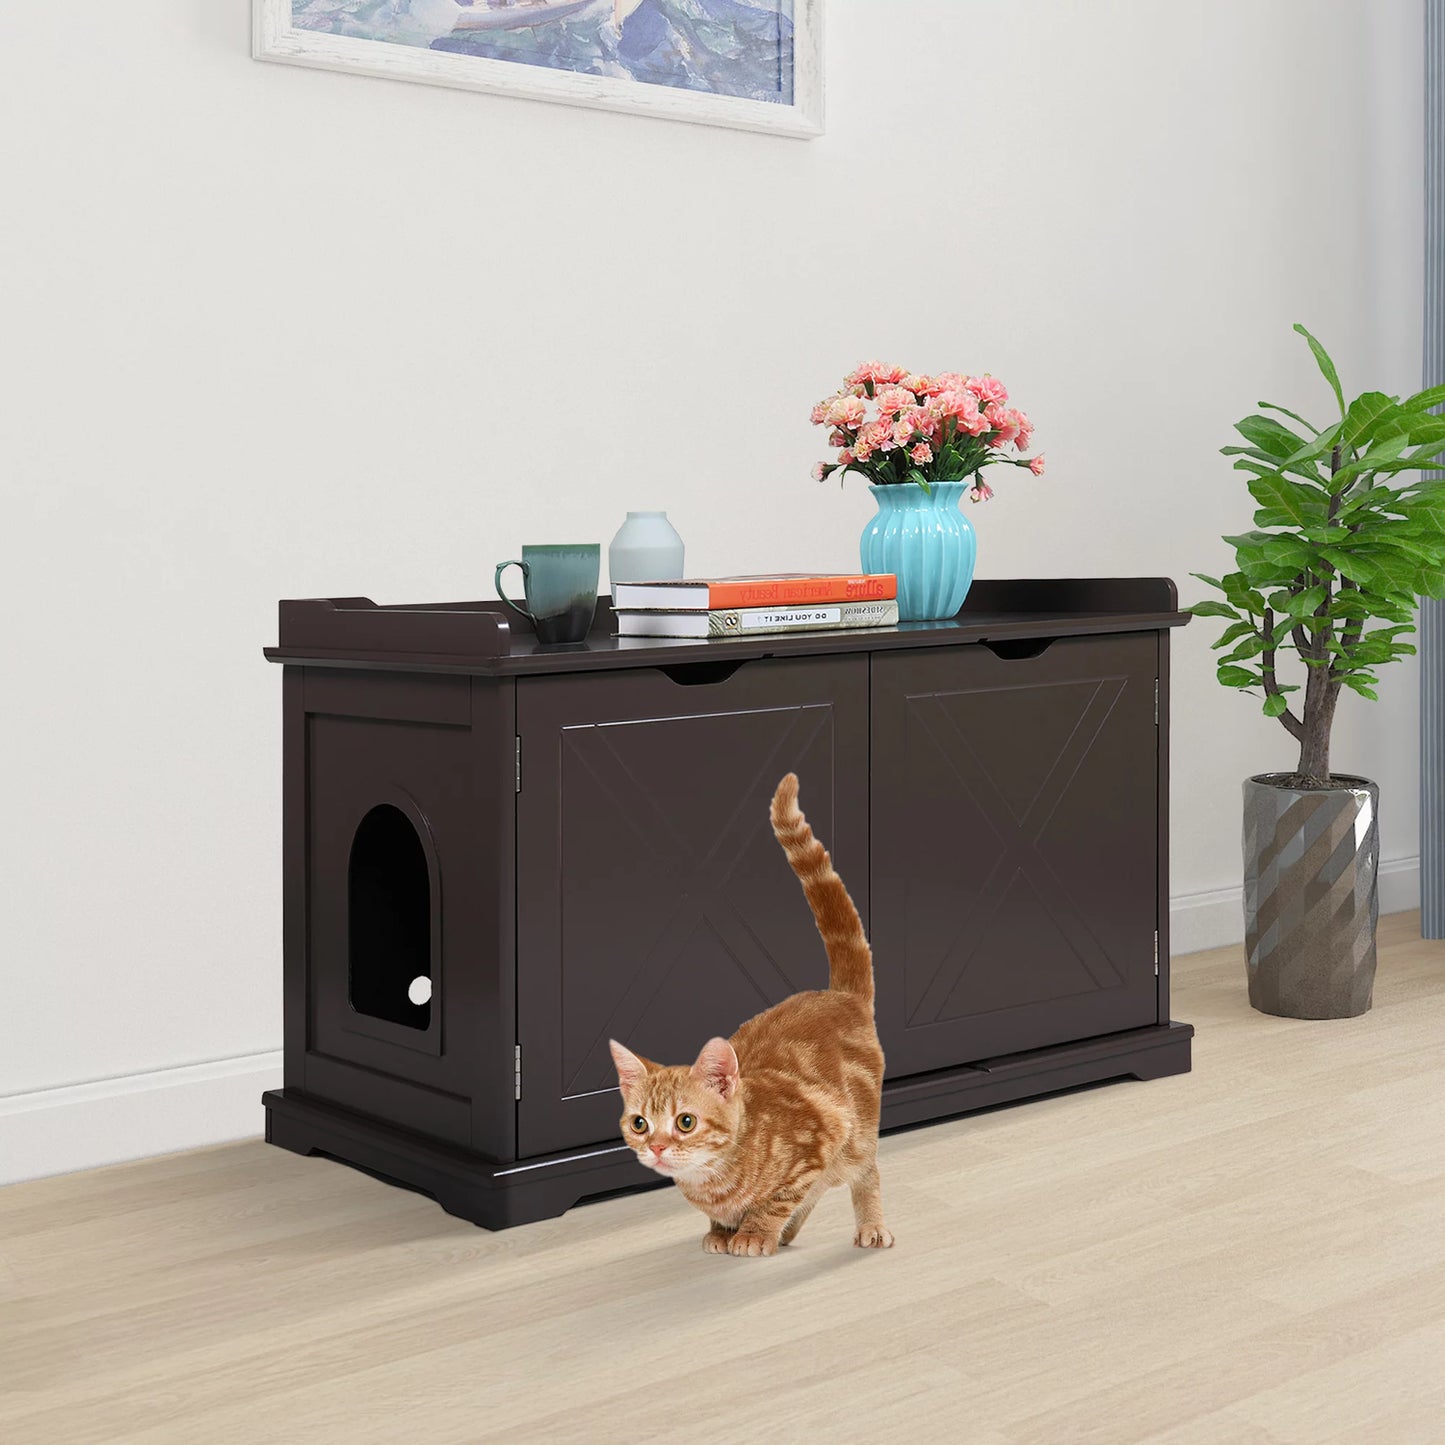 Cat Litter Box Furniture, SESSLIFE Wooden Pet Crate Litter Box Enclosure Hidden, Cat House Nightstand for Large Cats Kitty, Dark Brown, TE2162 Animals & Pet Supplies > Pet Supplies > Cat Supplies > Cat Furniture SESSLIFE Chocolate Color  